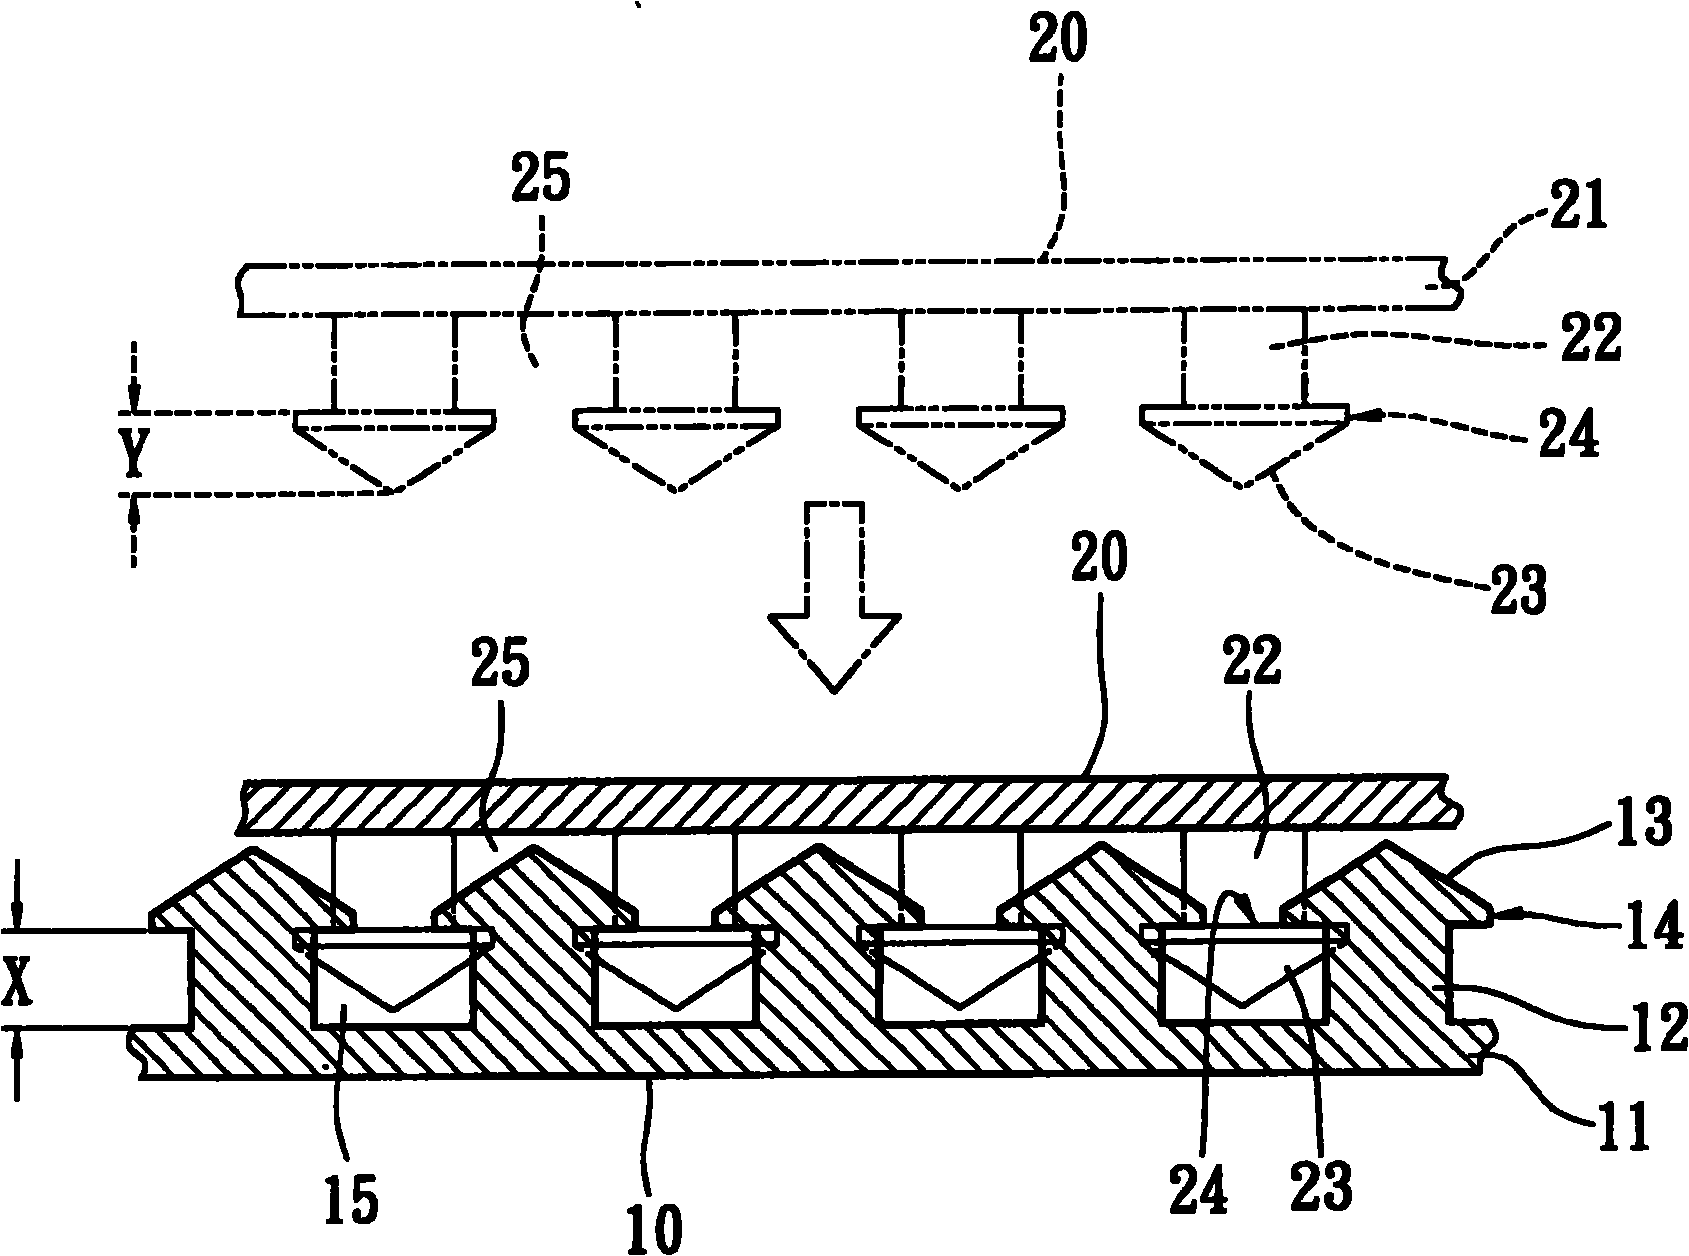 Process for manufacturing linking tape